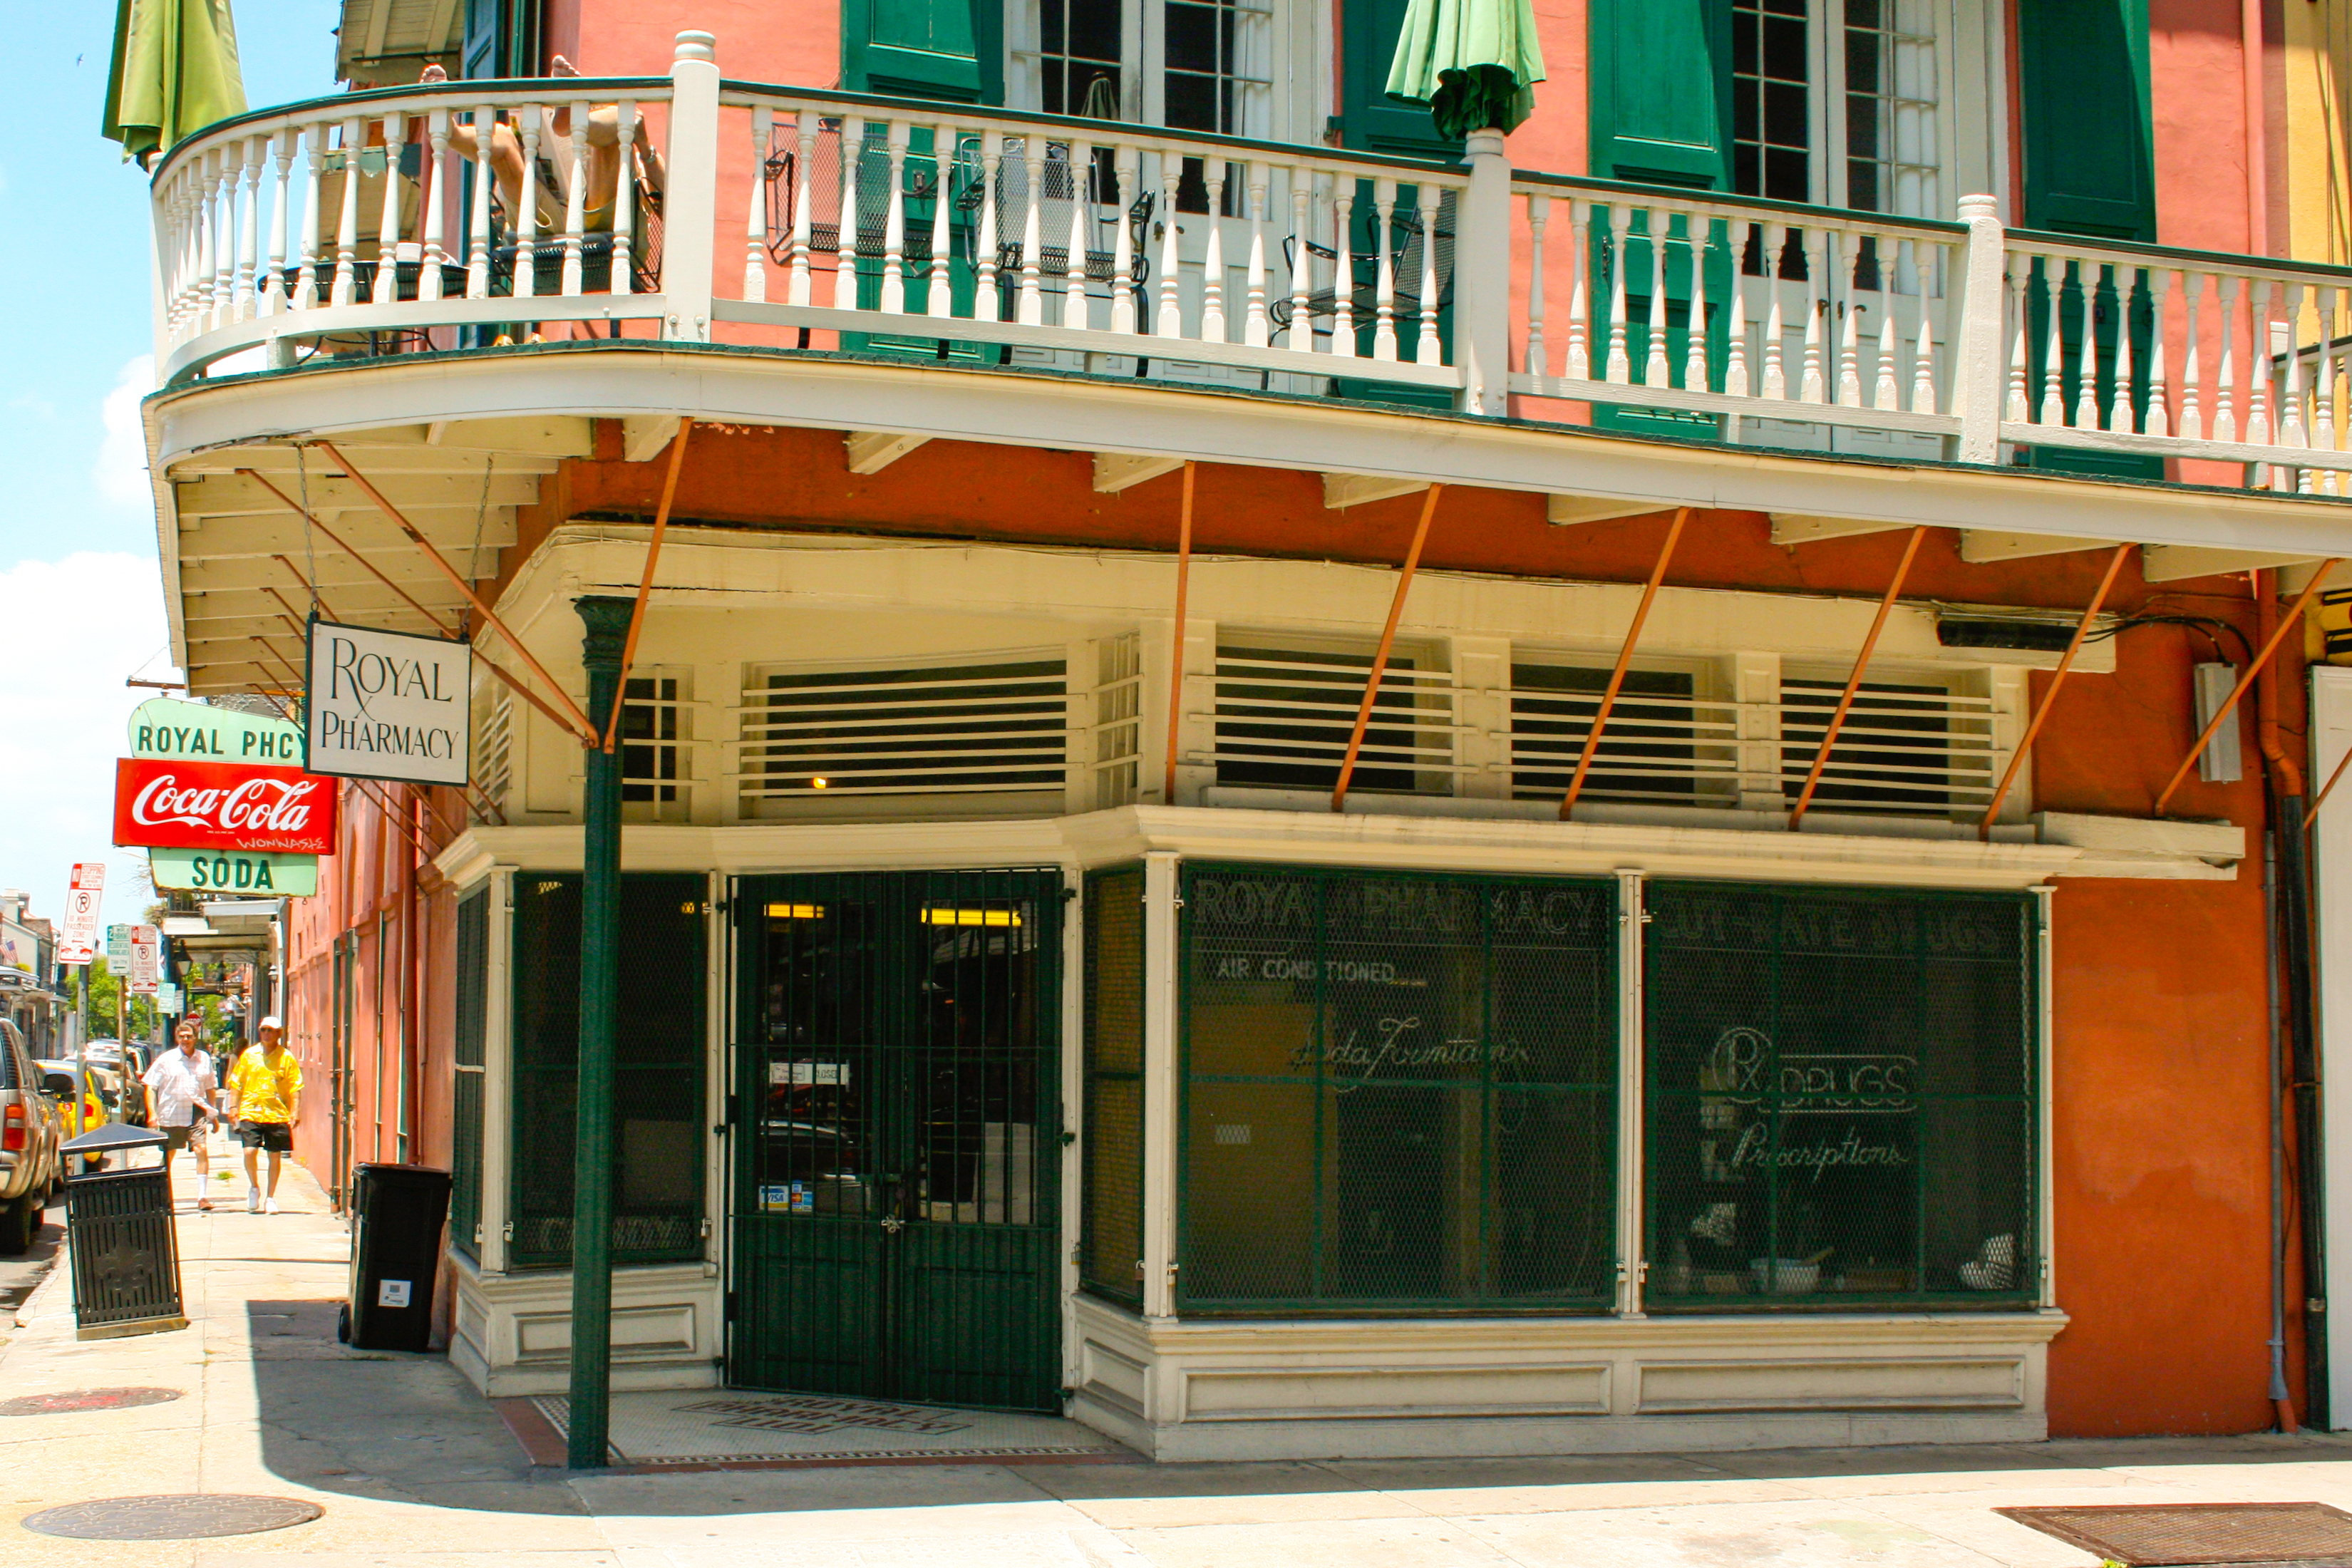 ../../../../../_images/russell-dyerhouse-french-quarter-new-orleans-20070506-091.jpg